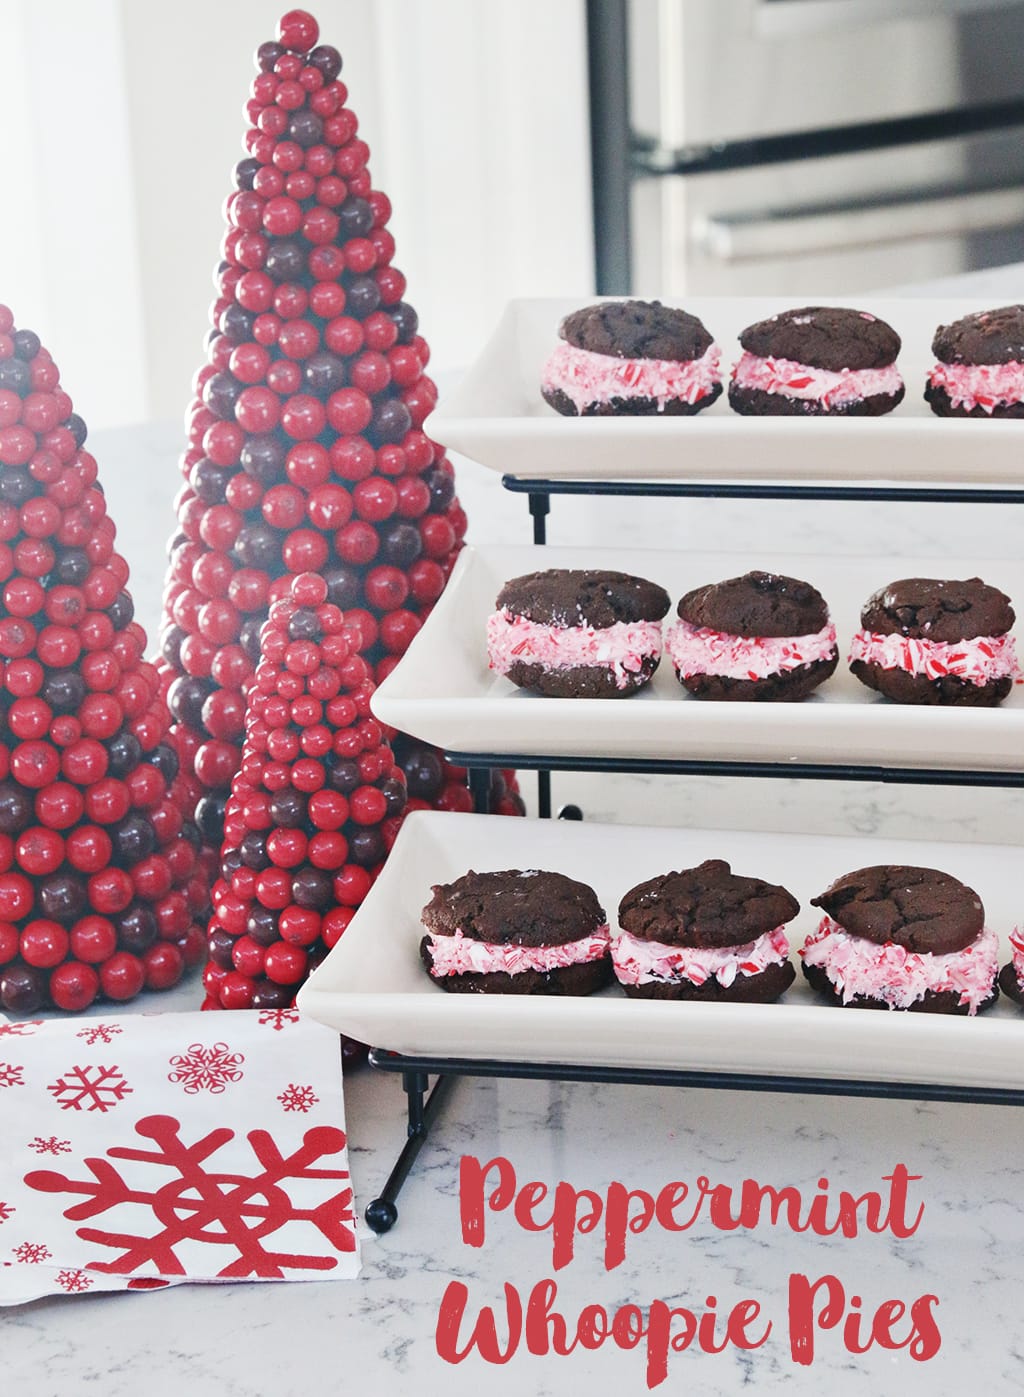 Peppermint Whoopie Pies Recipe - A yummy dessert for Christmas parties or a family get together.